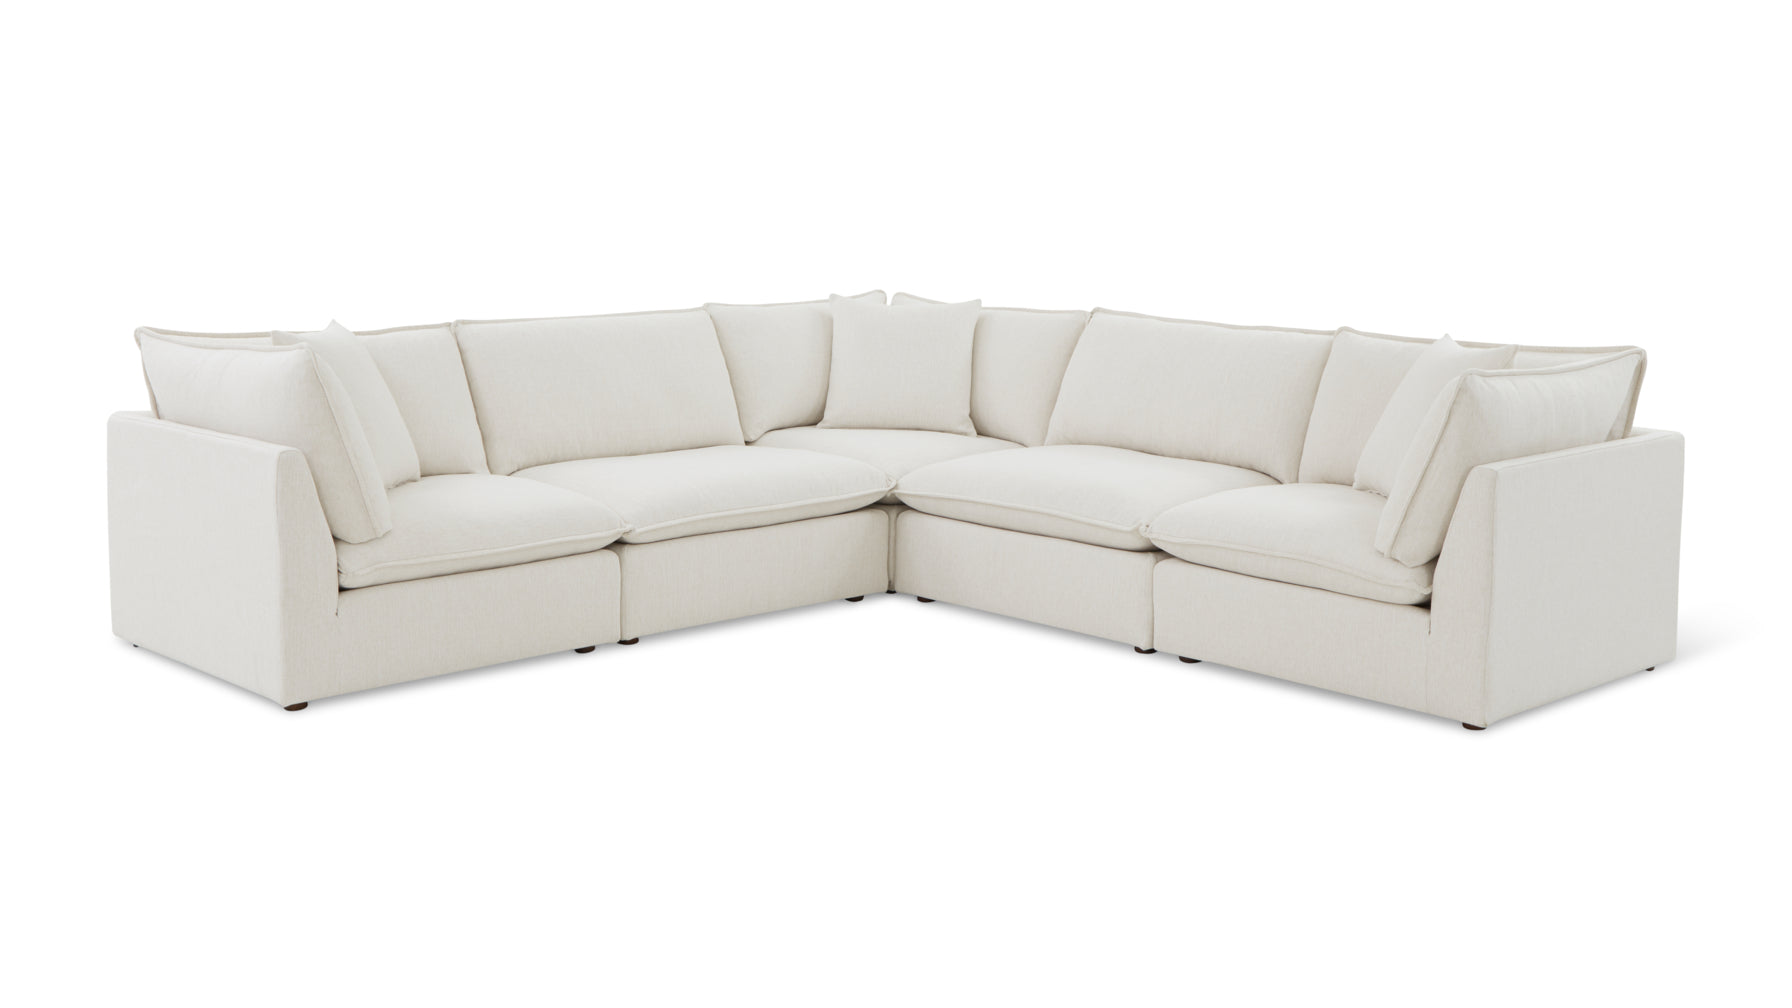 Chill Time 5-Piece Modular Sectional Closed, Birch - Image 4